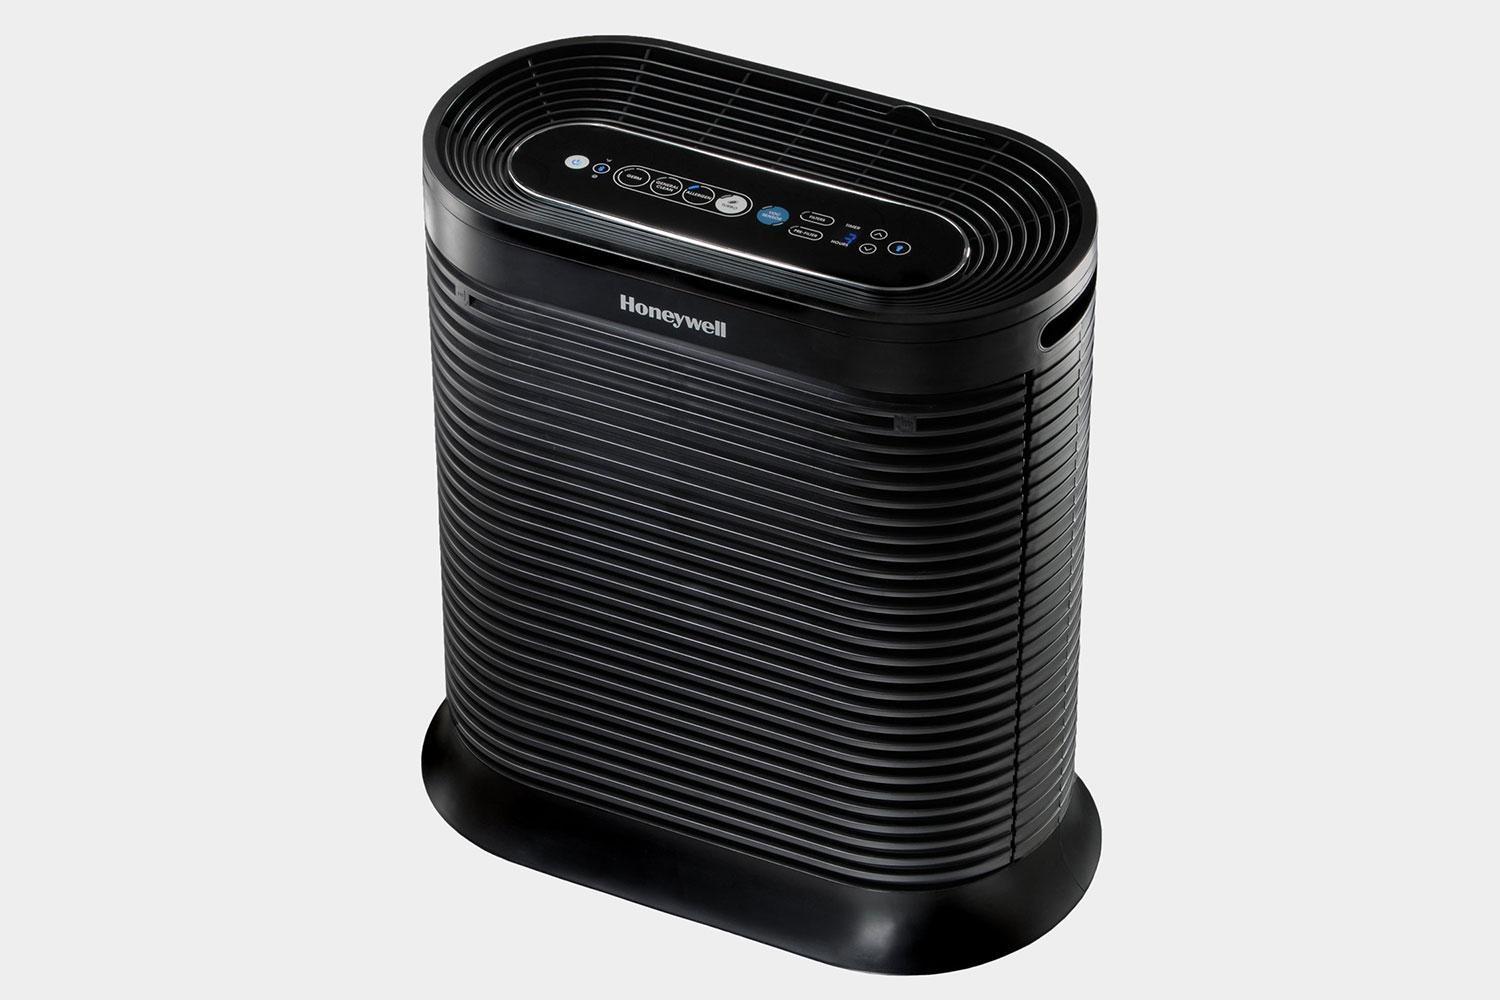 Honeywell HPA250B air purifier with Bluetooth smart controls